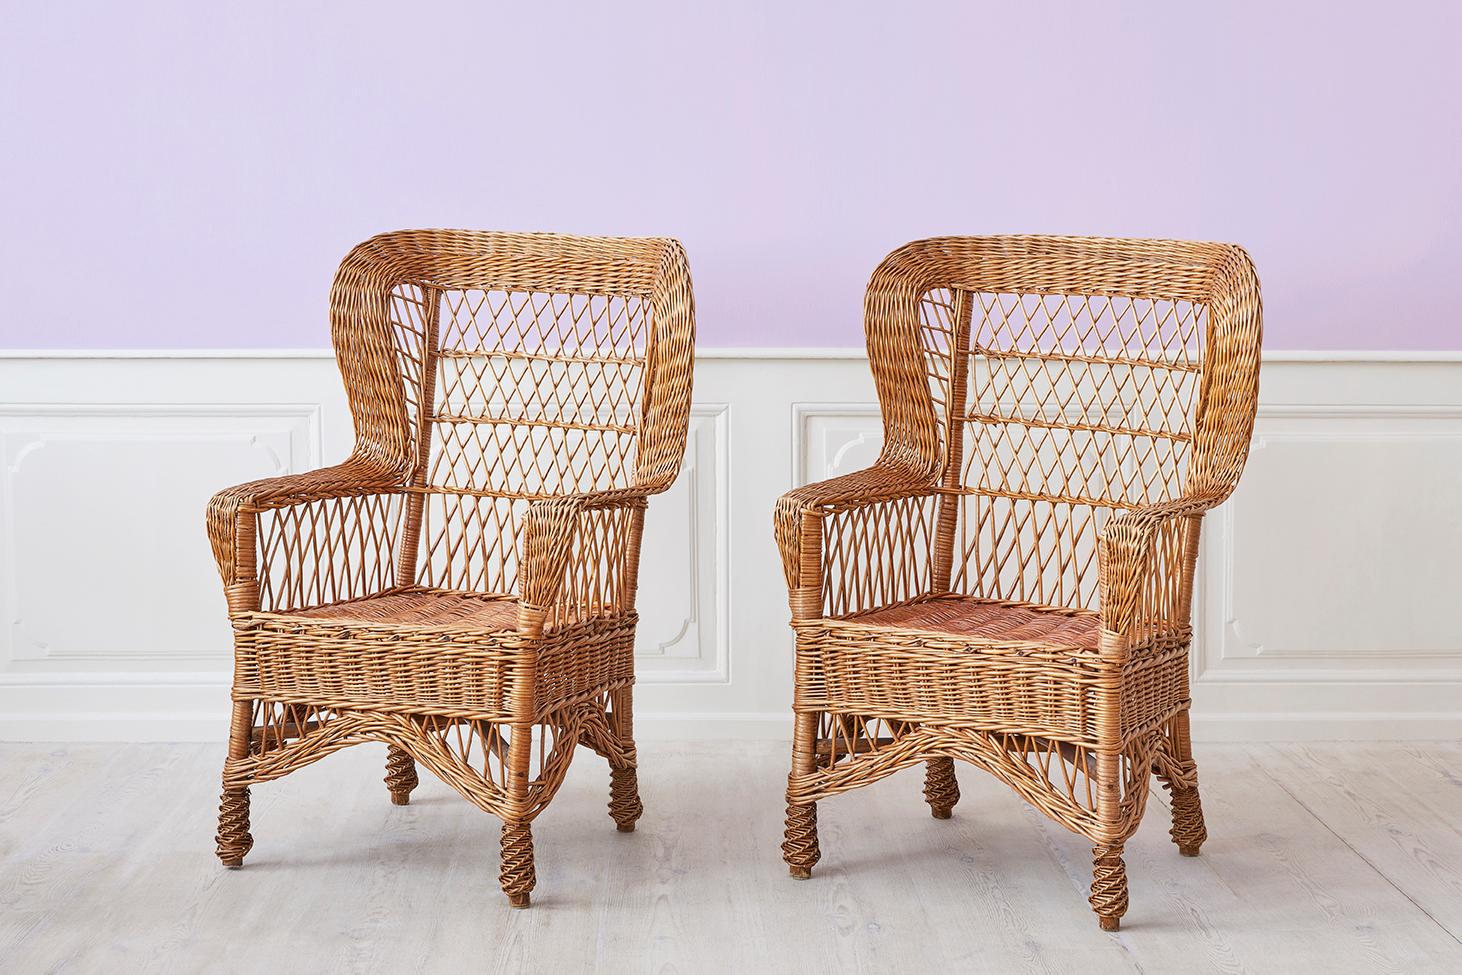 France, 1970's

A pair of rattan armchairs. 

H 106 x W 72 x D 52 cm